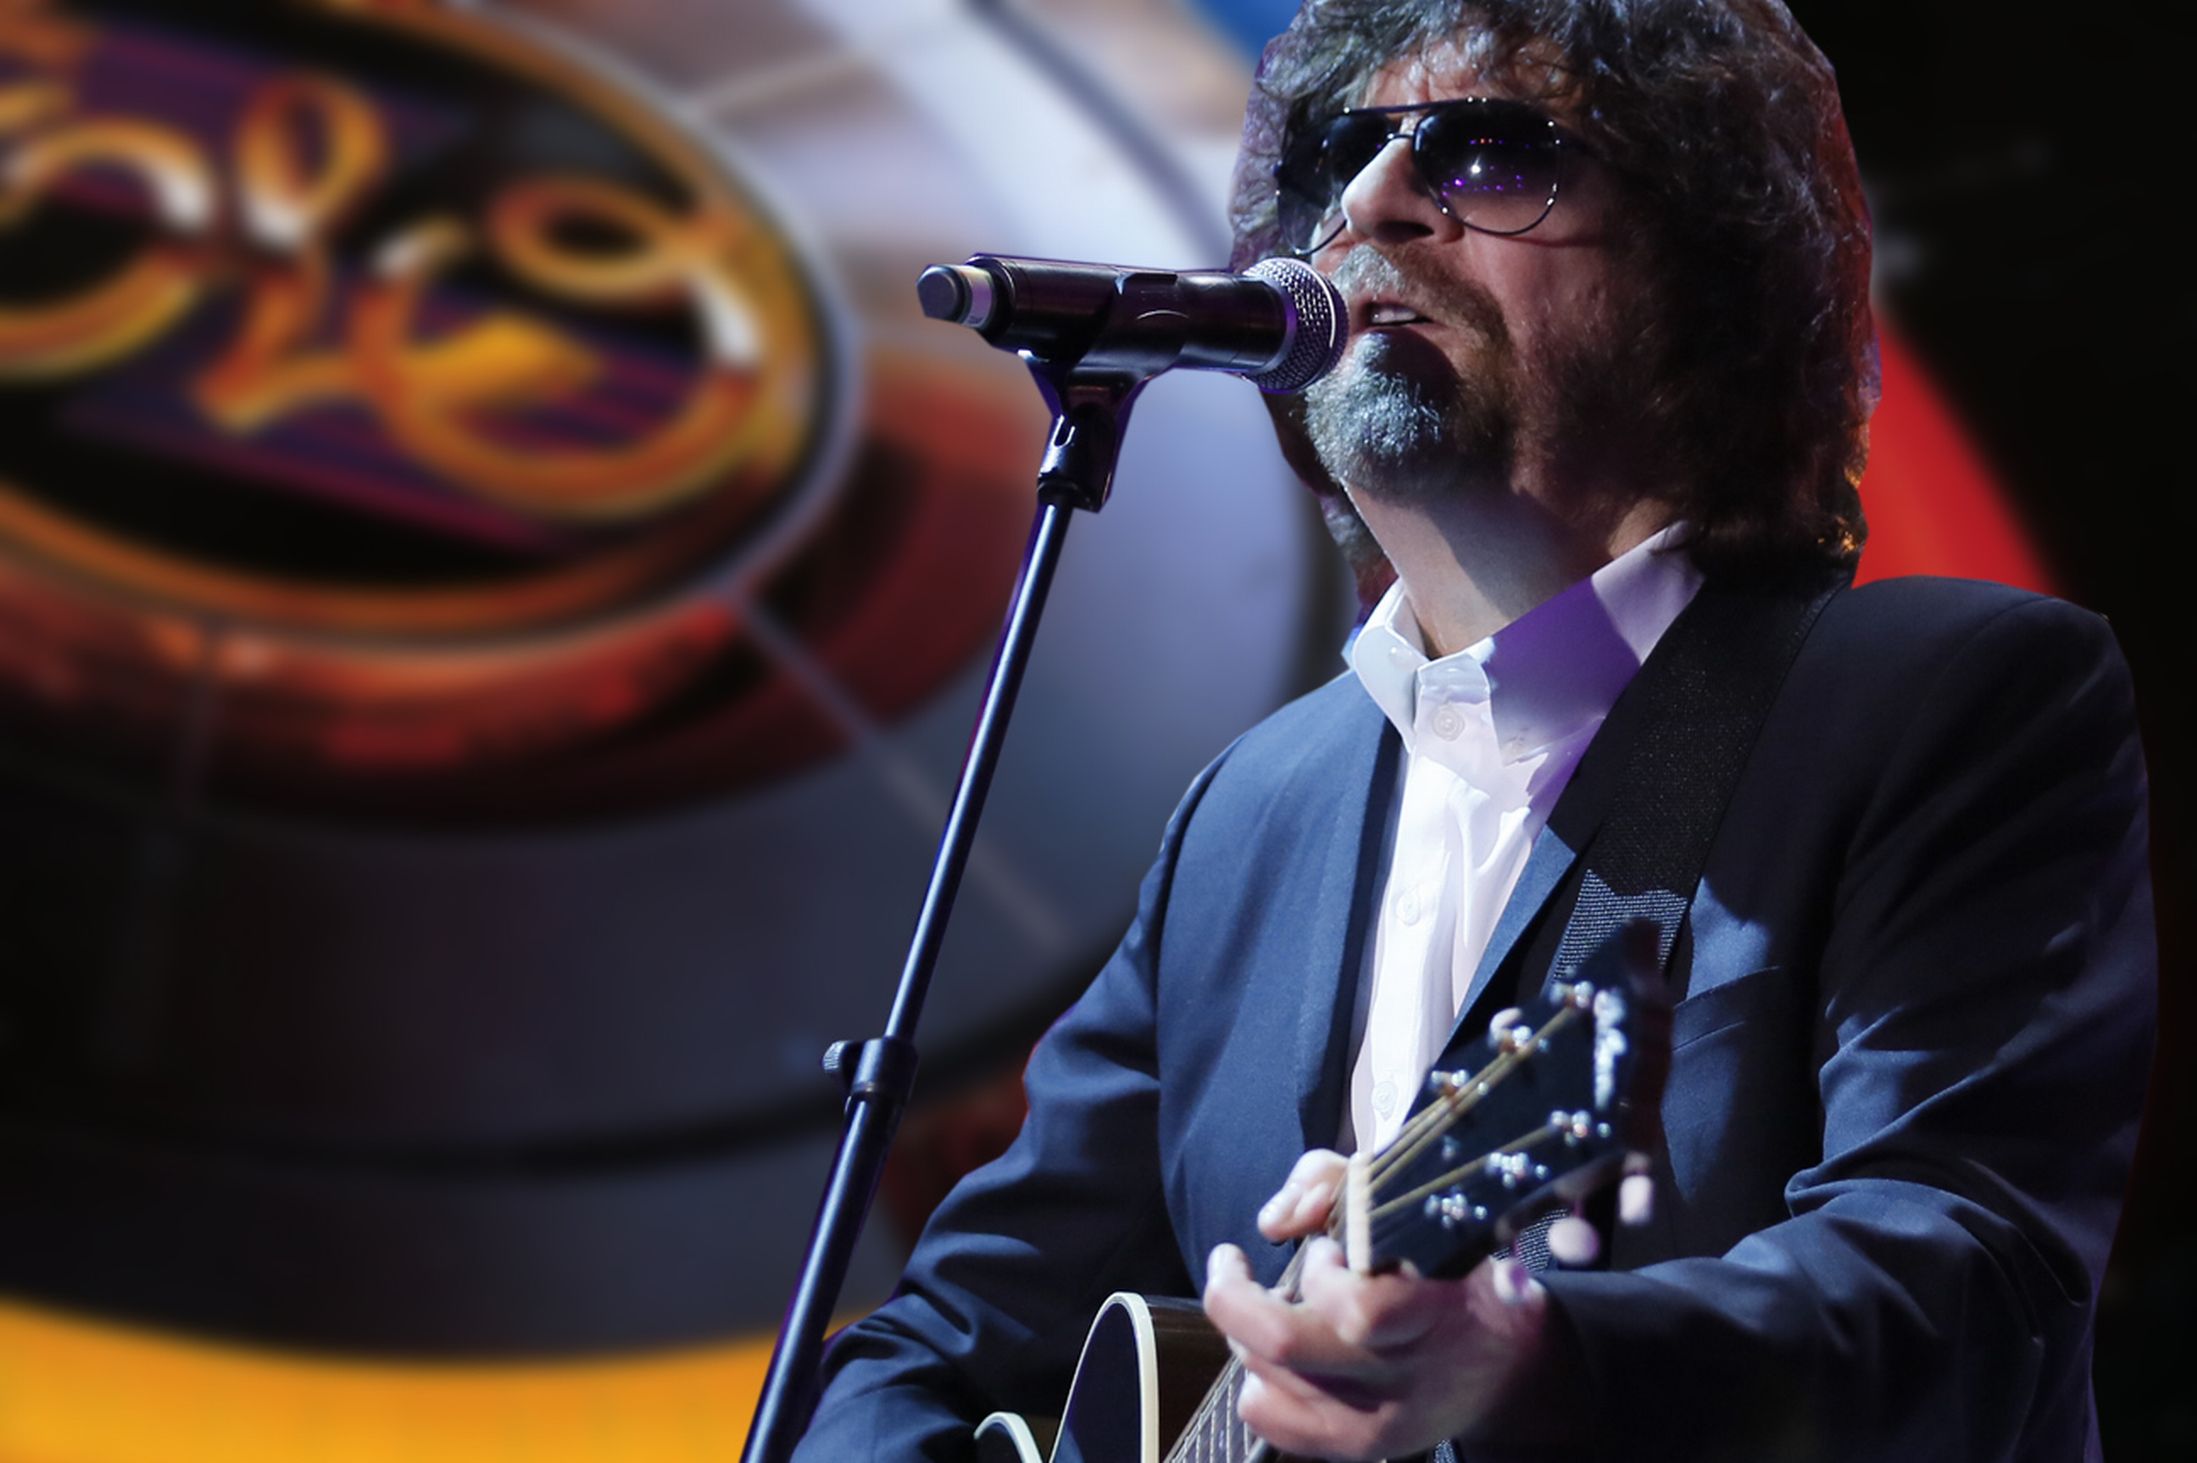 The Surprising Reason ELO Says “Groos” In Their Hit Song!